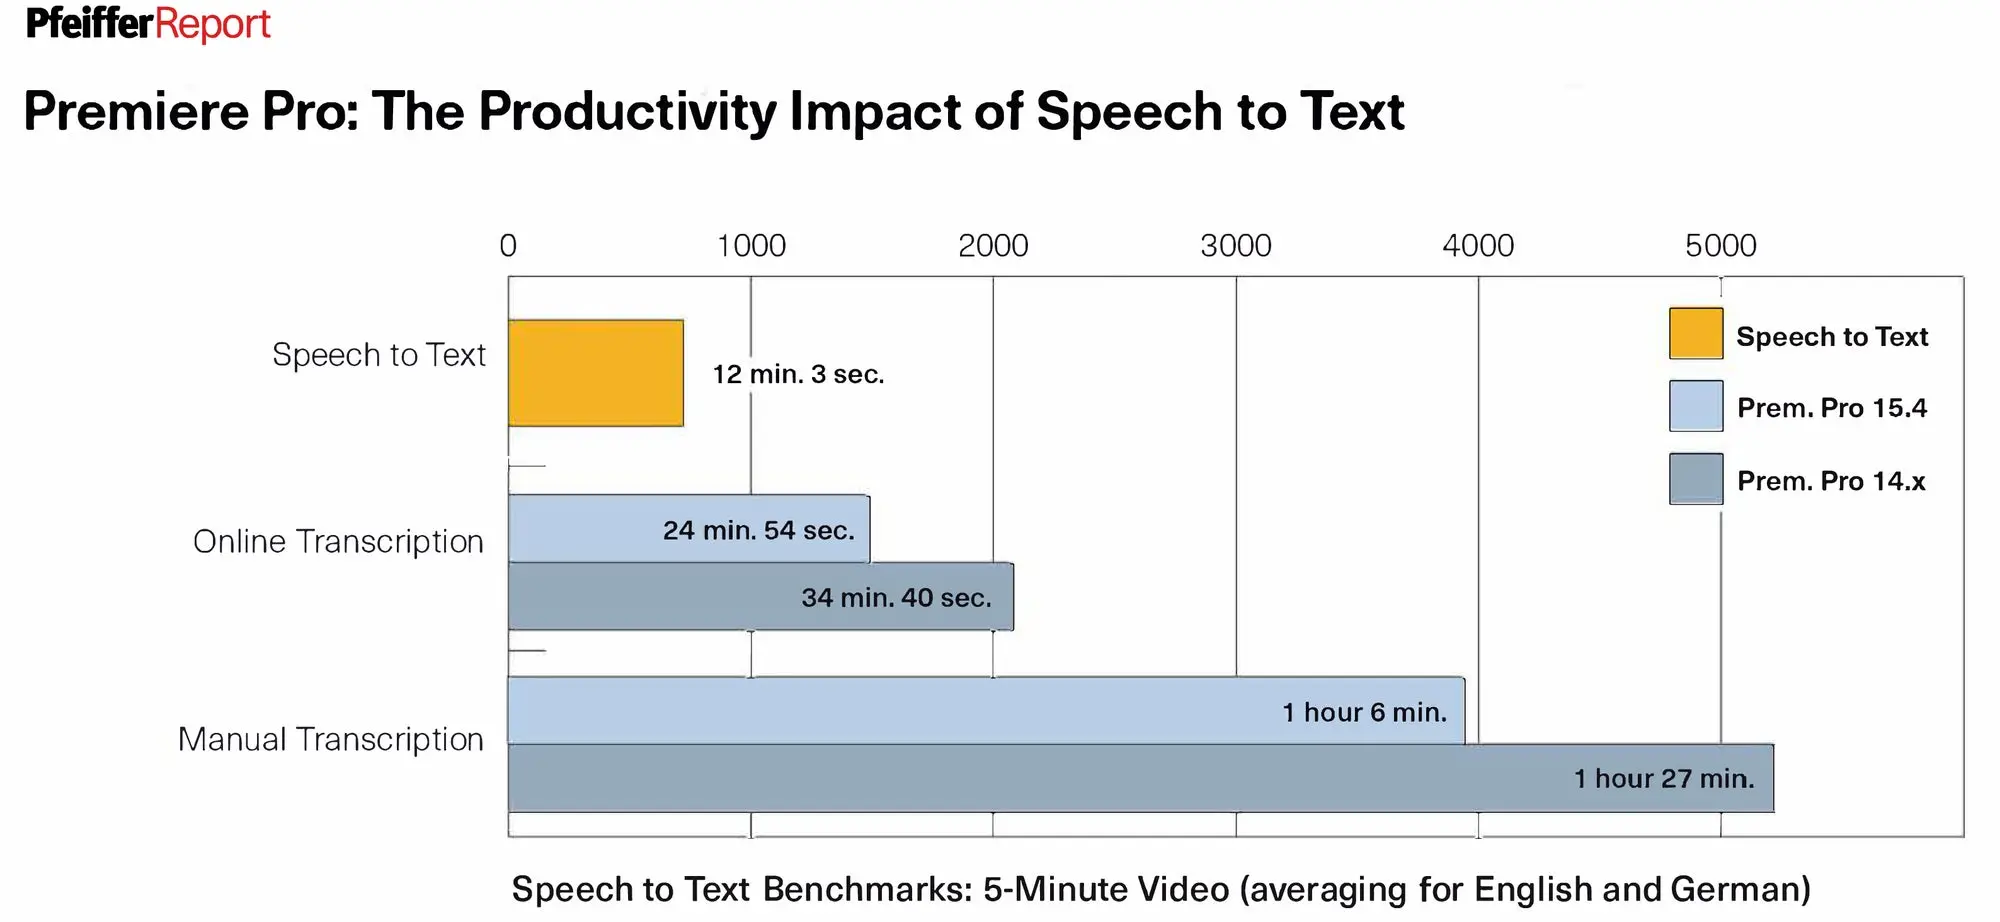 The Productivity Impact of Speech to Text from the Pfeiffer Report.